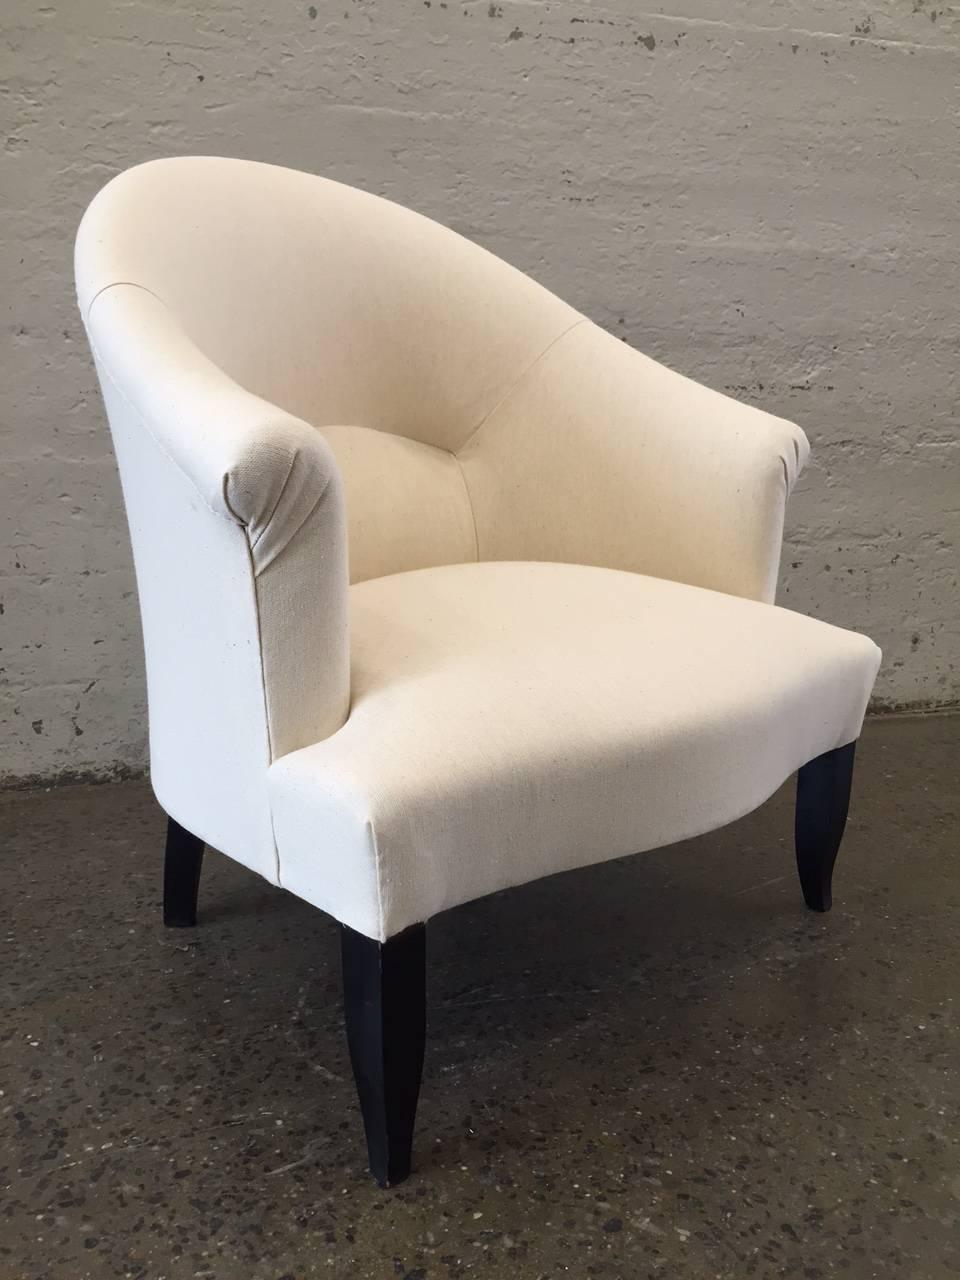 Pair of French country slipper chairs upholstered in linen-blend with black lacquered legs.